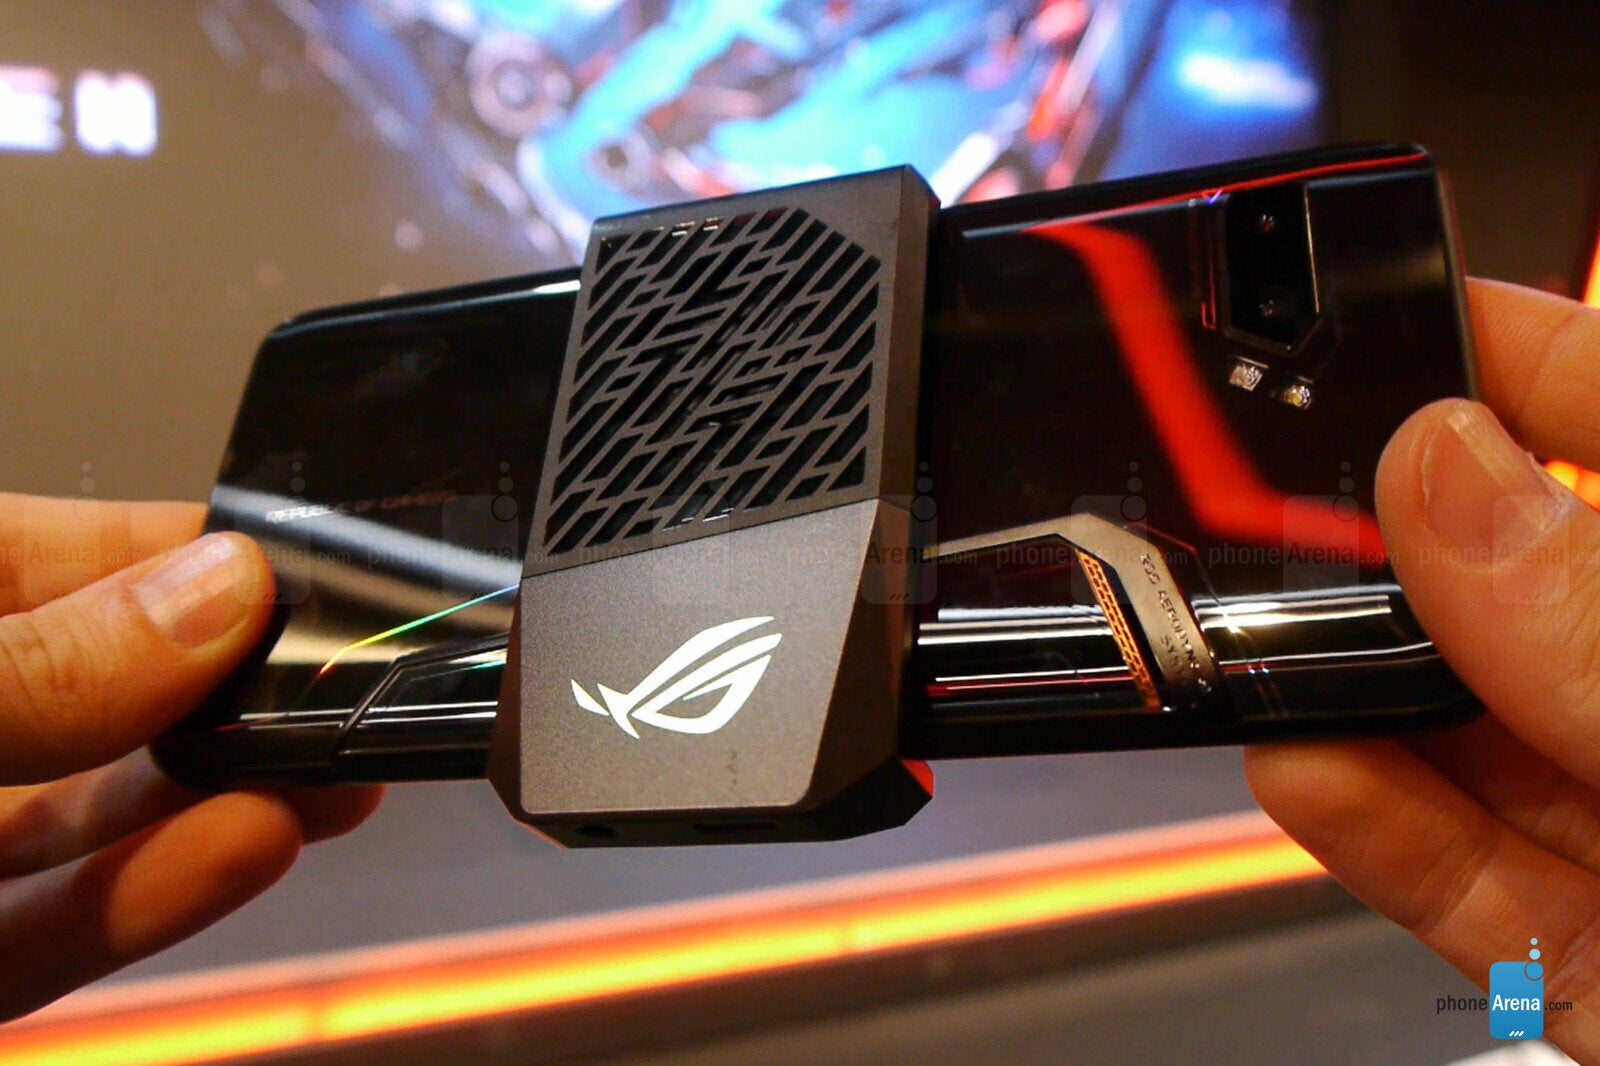 The AeroActive Cooler 2 is an optional air cooler. - Asus ROG Phone 2 is a ridiculously powerful Android phone with Snapdragon 855 Plus and air cooling [hands-on]